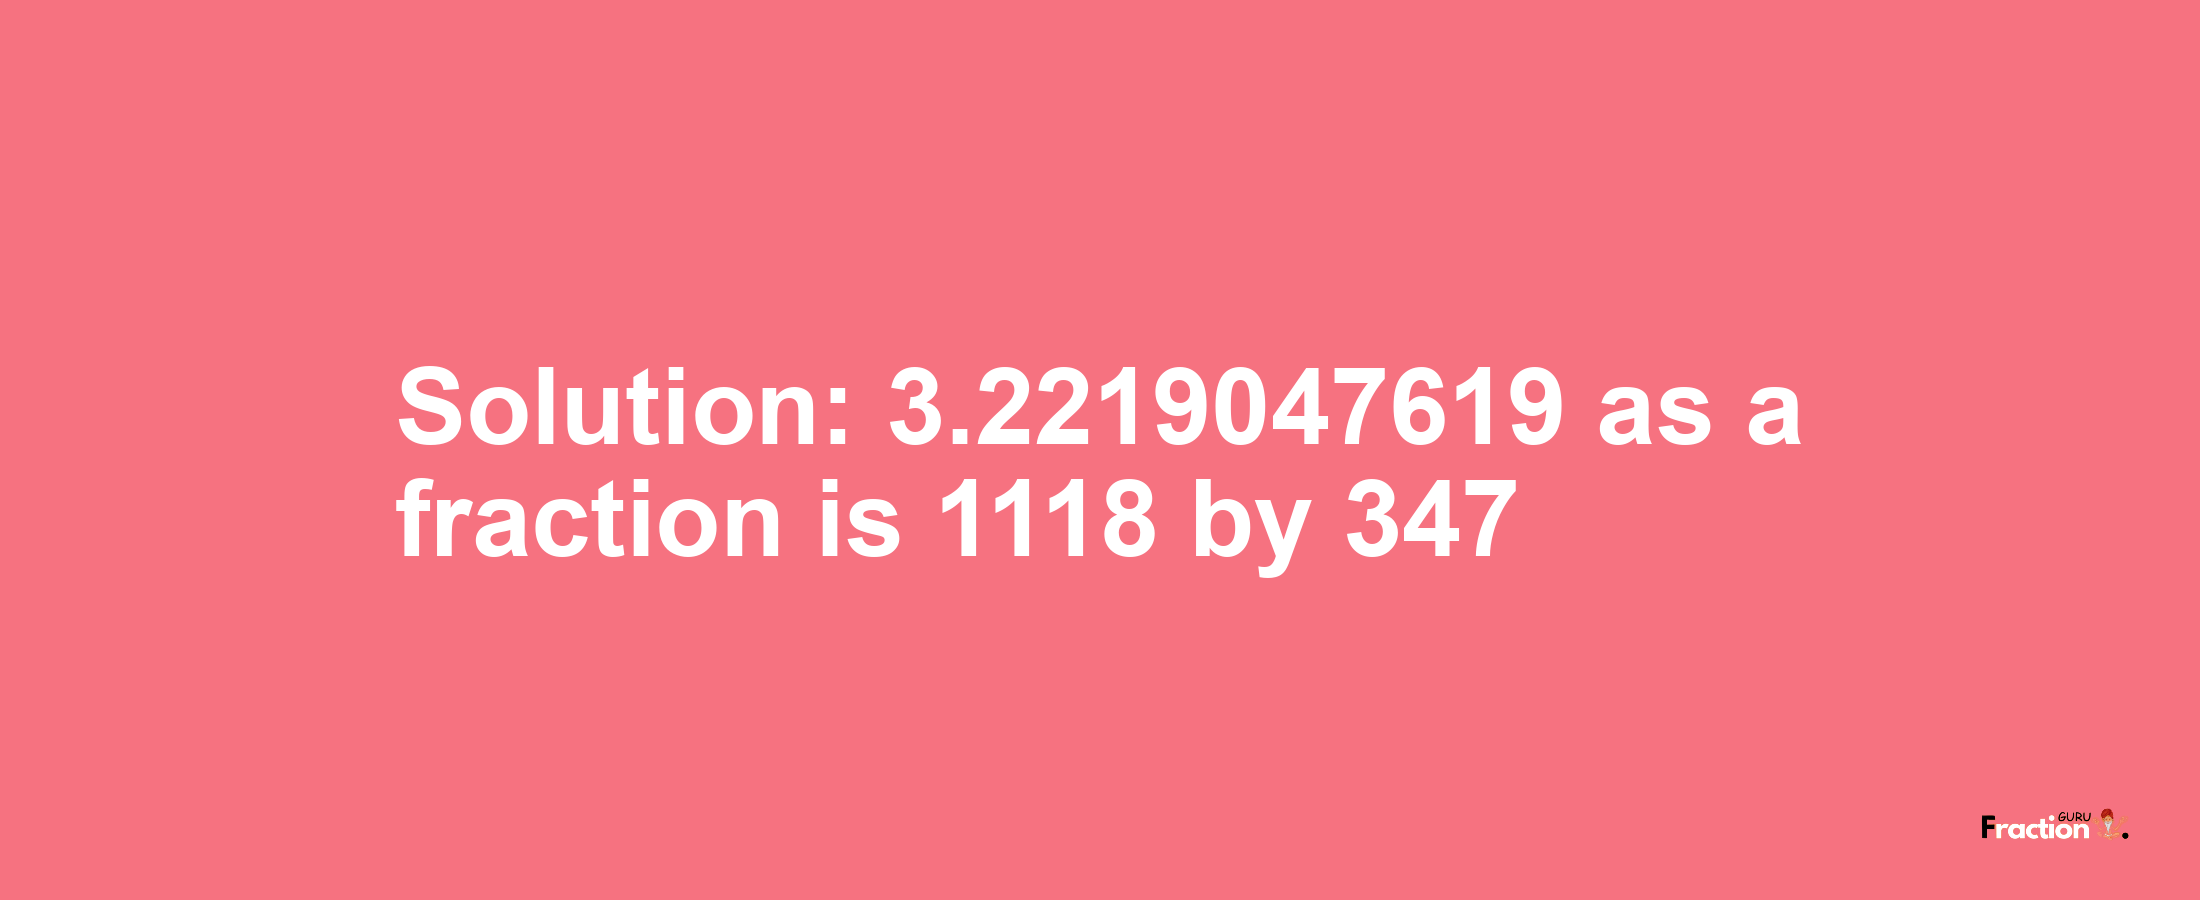 Solution:3.2219047619 as a fraction is 1118/347